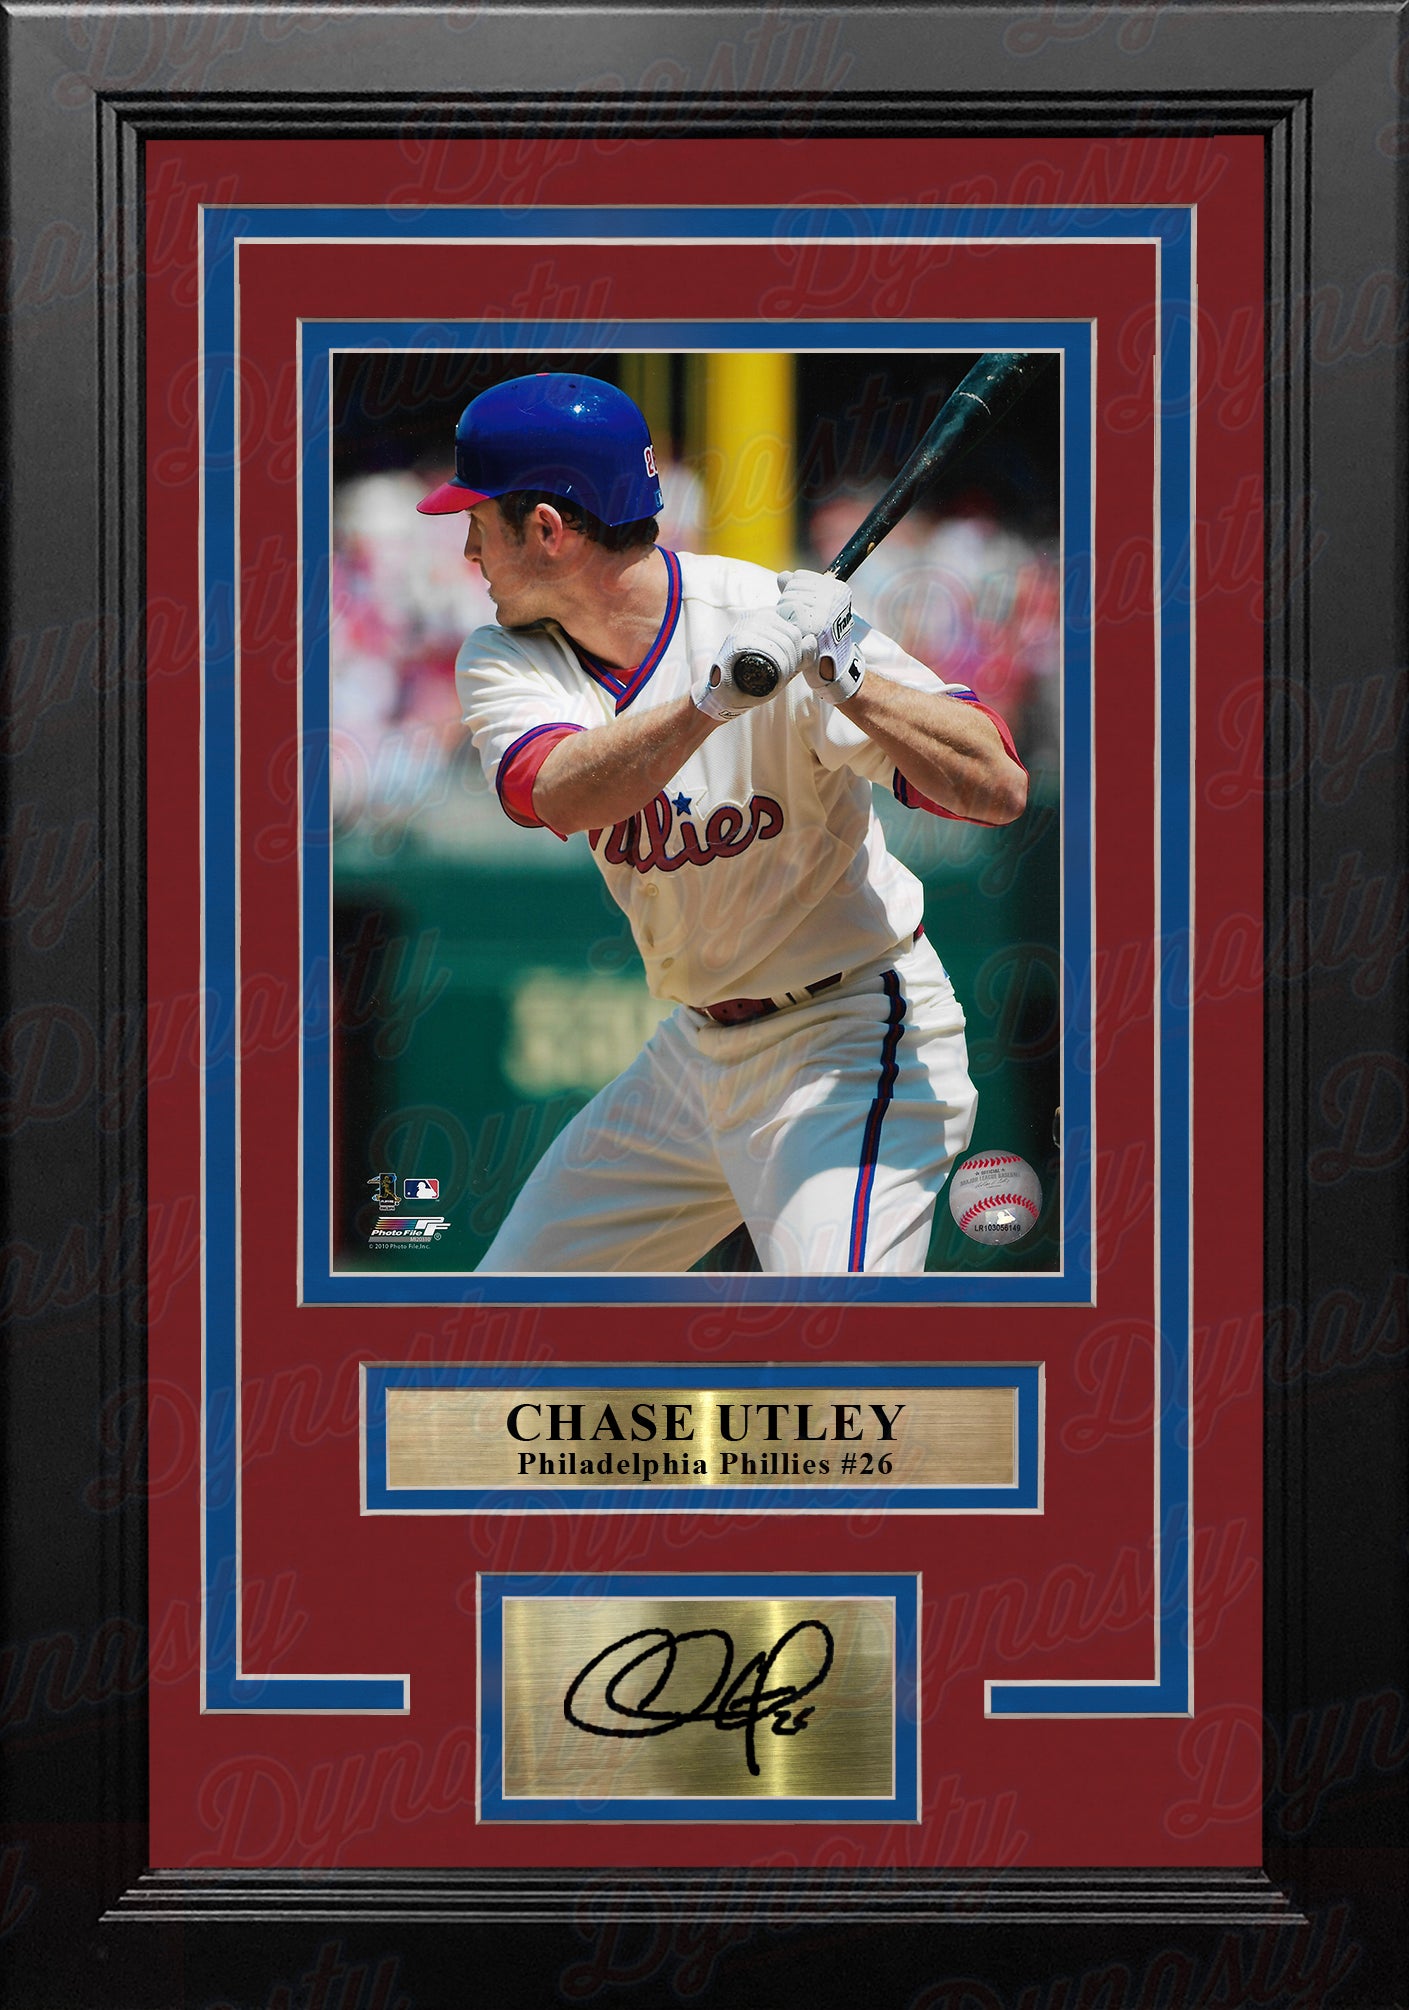 Chase Utley Batting Stance Philadelphia Phillies 8x10 Framed Photo with Engraved Autograph - Dynasty Sports & Framing 